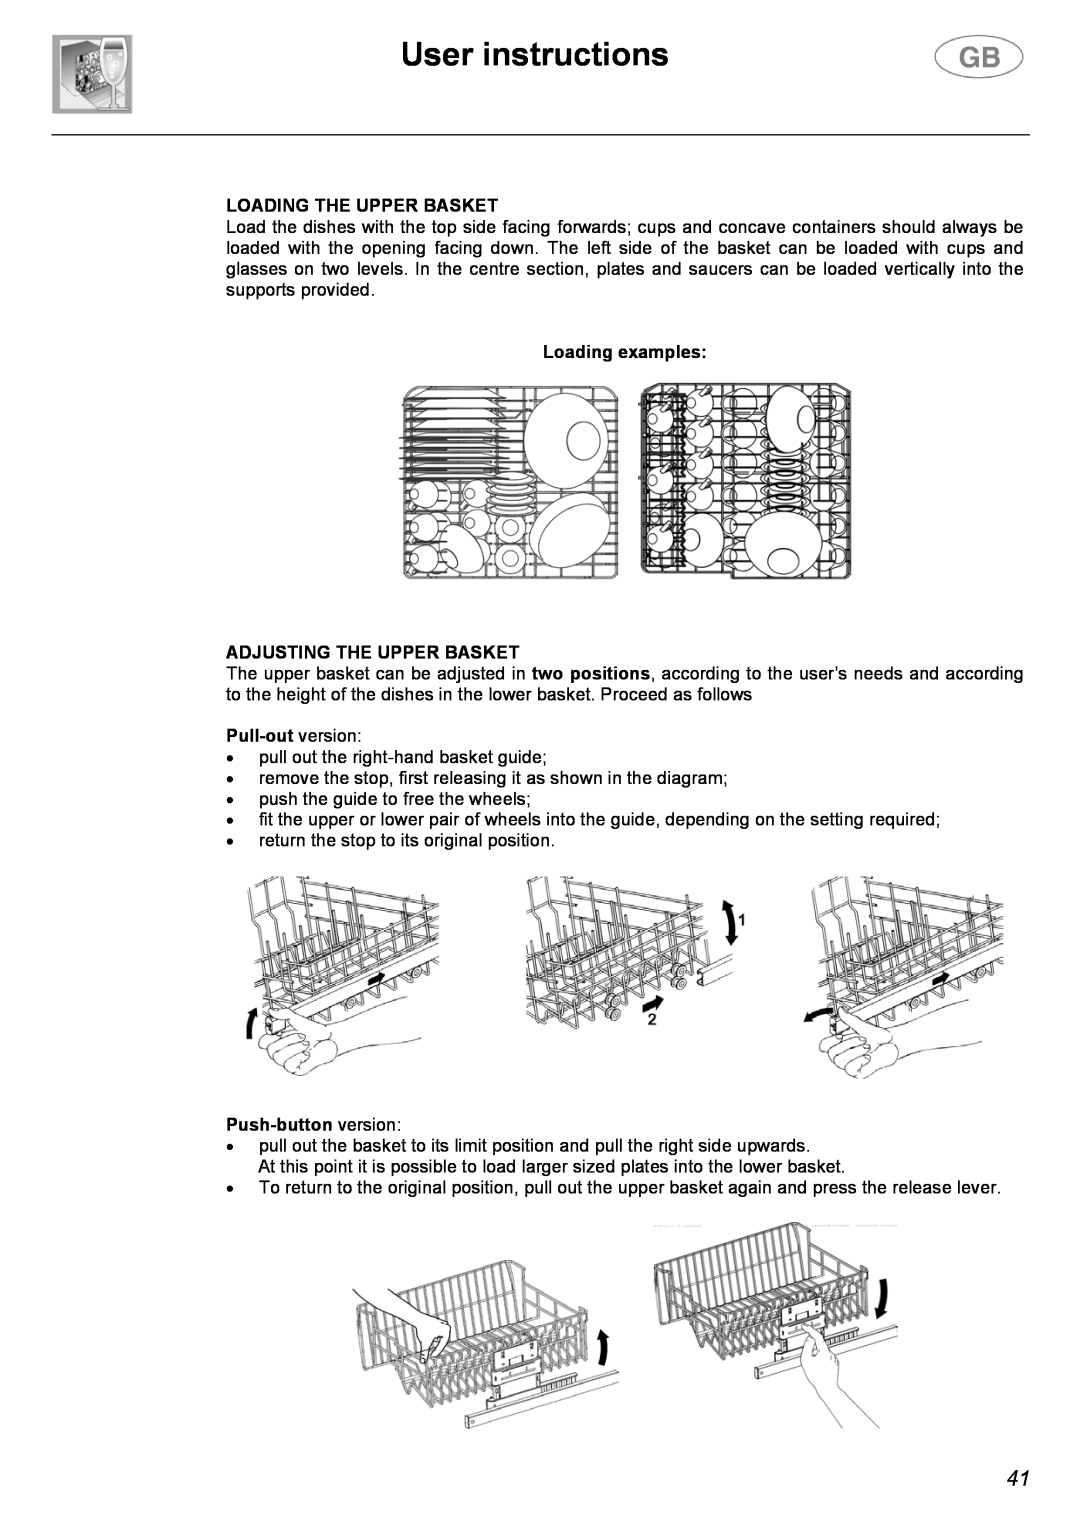 Smeg CA01-1 User instructions, Loading The Upper Basket, Loading examples ADJUSTING THE UPPER BASKET, Pull-out version 